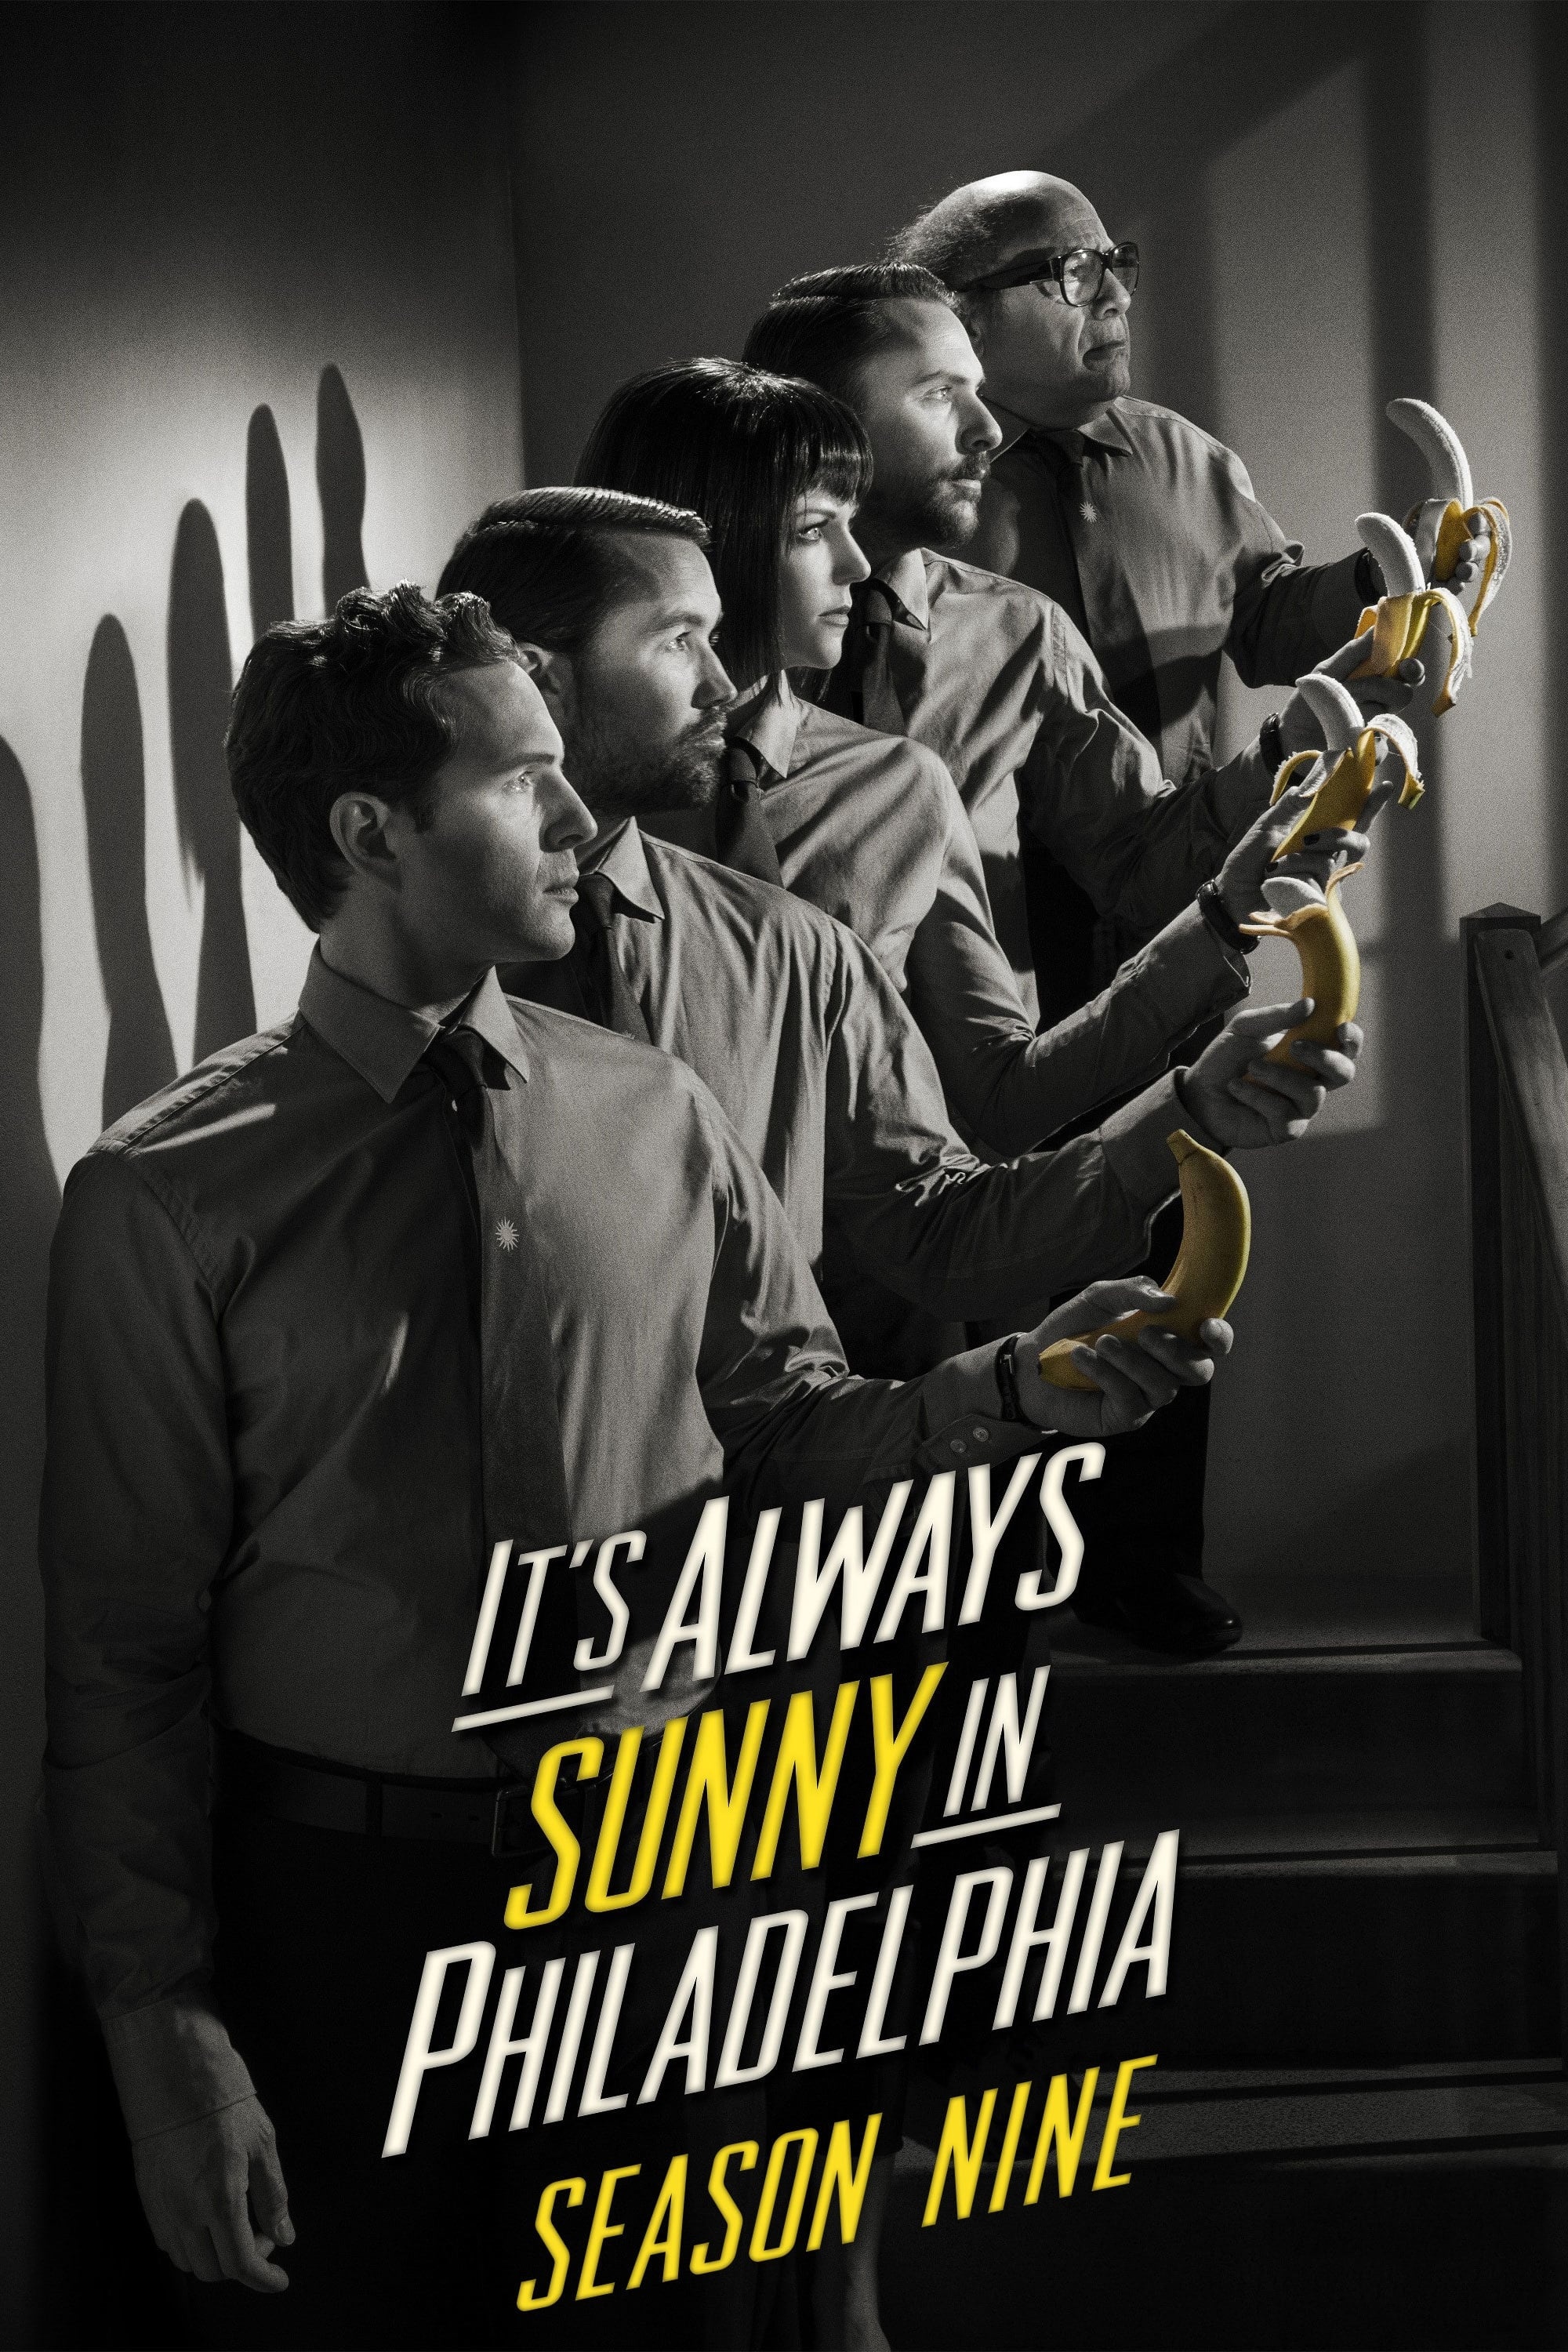 It's Always Sunny in Philadelphia (TV Series): An American sitcom that premiered on FX on August 4, 2005, Poster, Season 9. 2000x3000 HD Background.